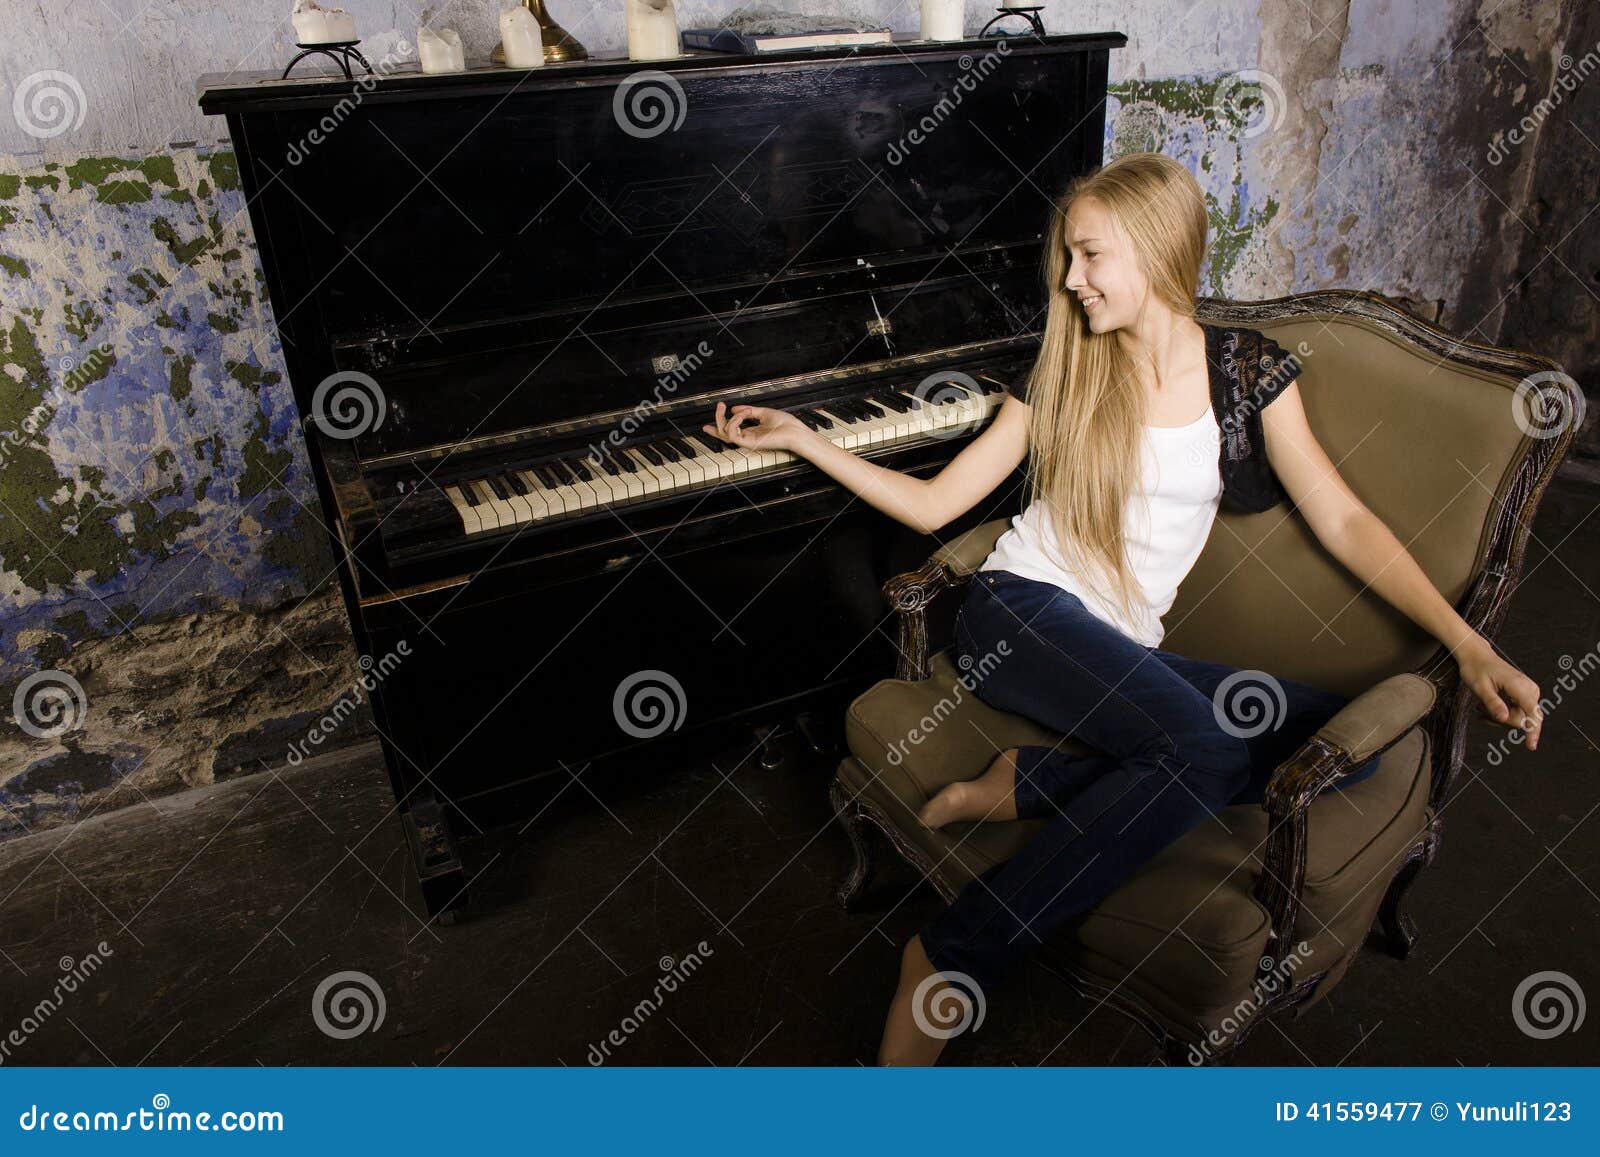 Young Blond Girl Playing On Piano Stock Image Image Of Arts Home